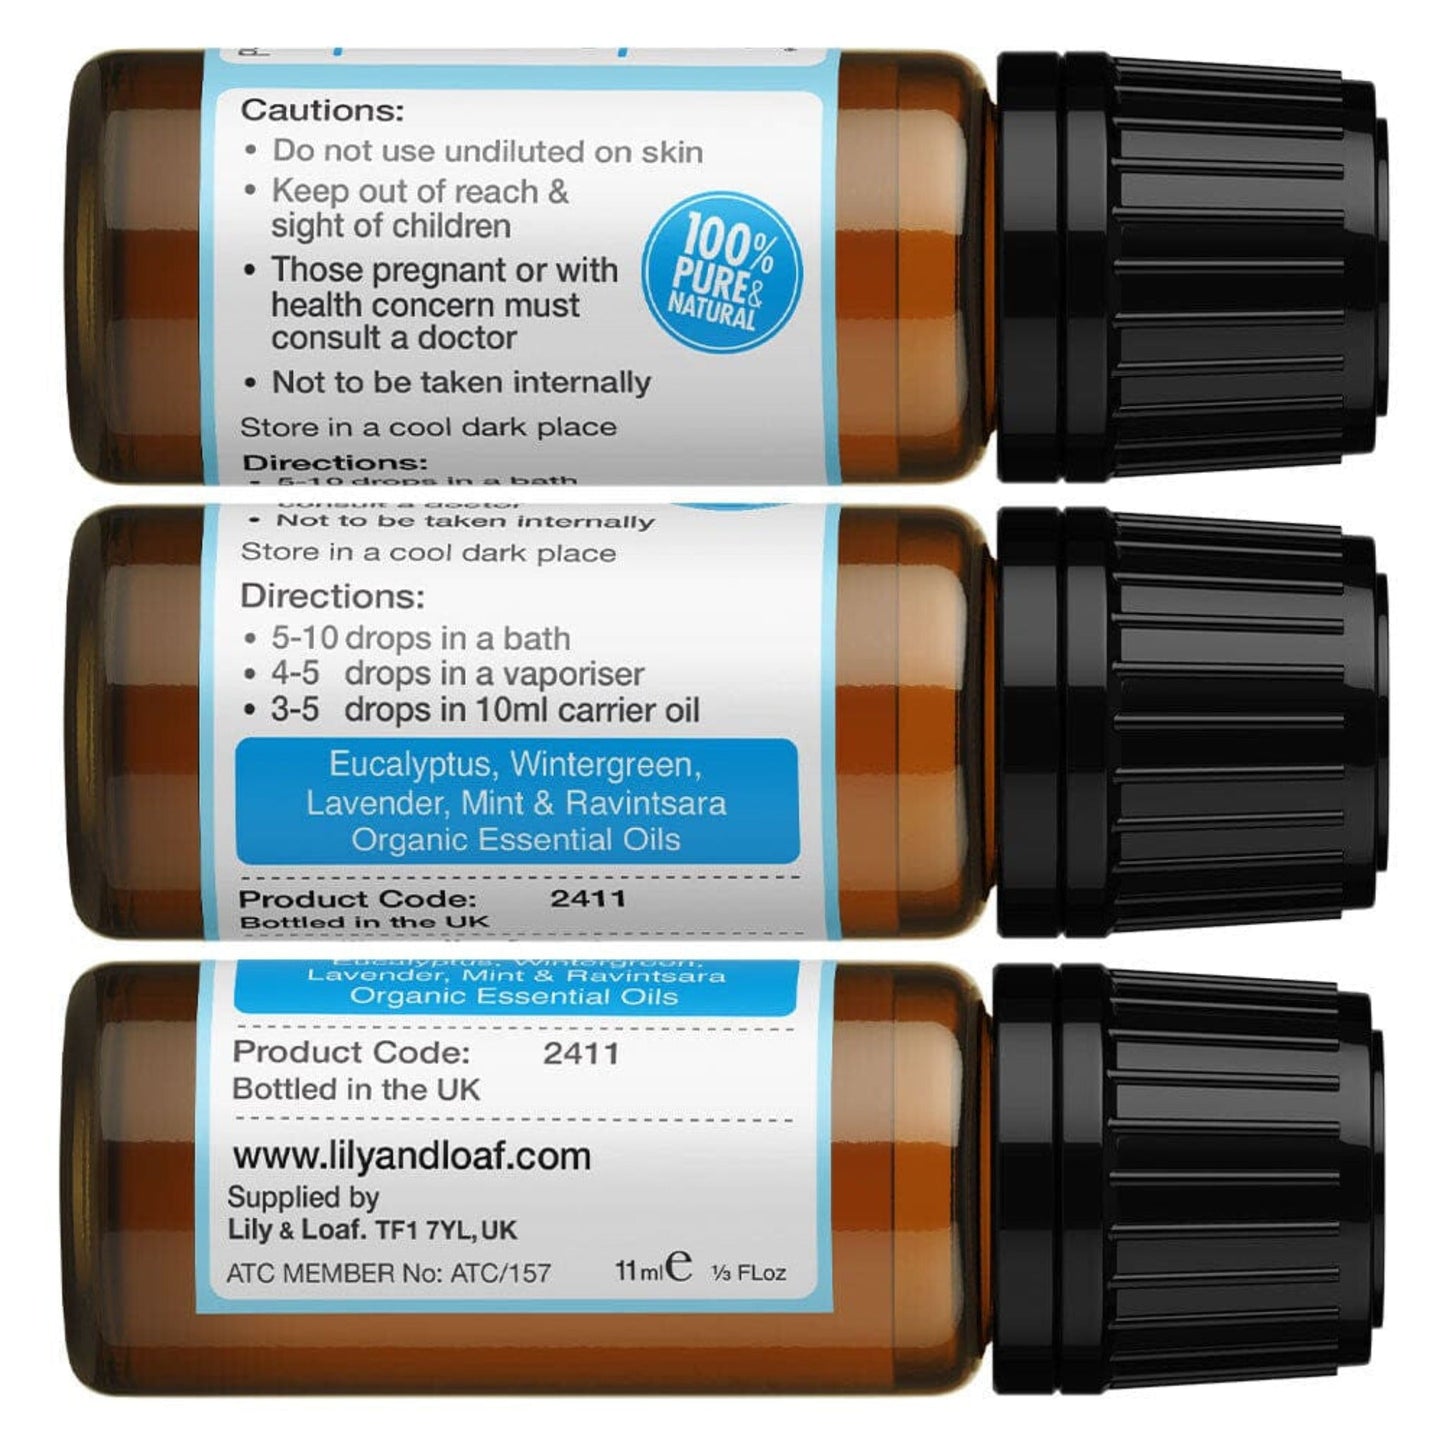 Lily & Loaf Breathe & Ease Aromatherapy Blend label with ingredients and cautions